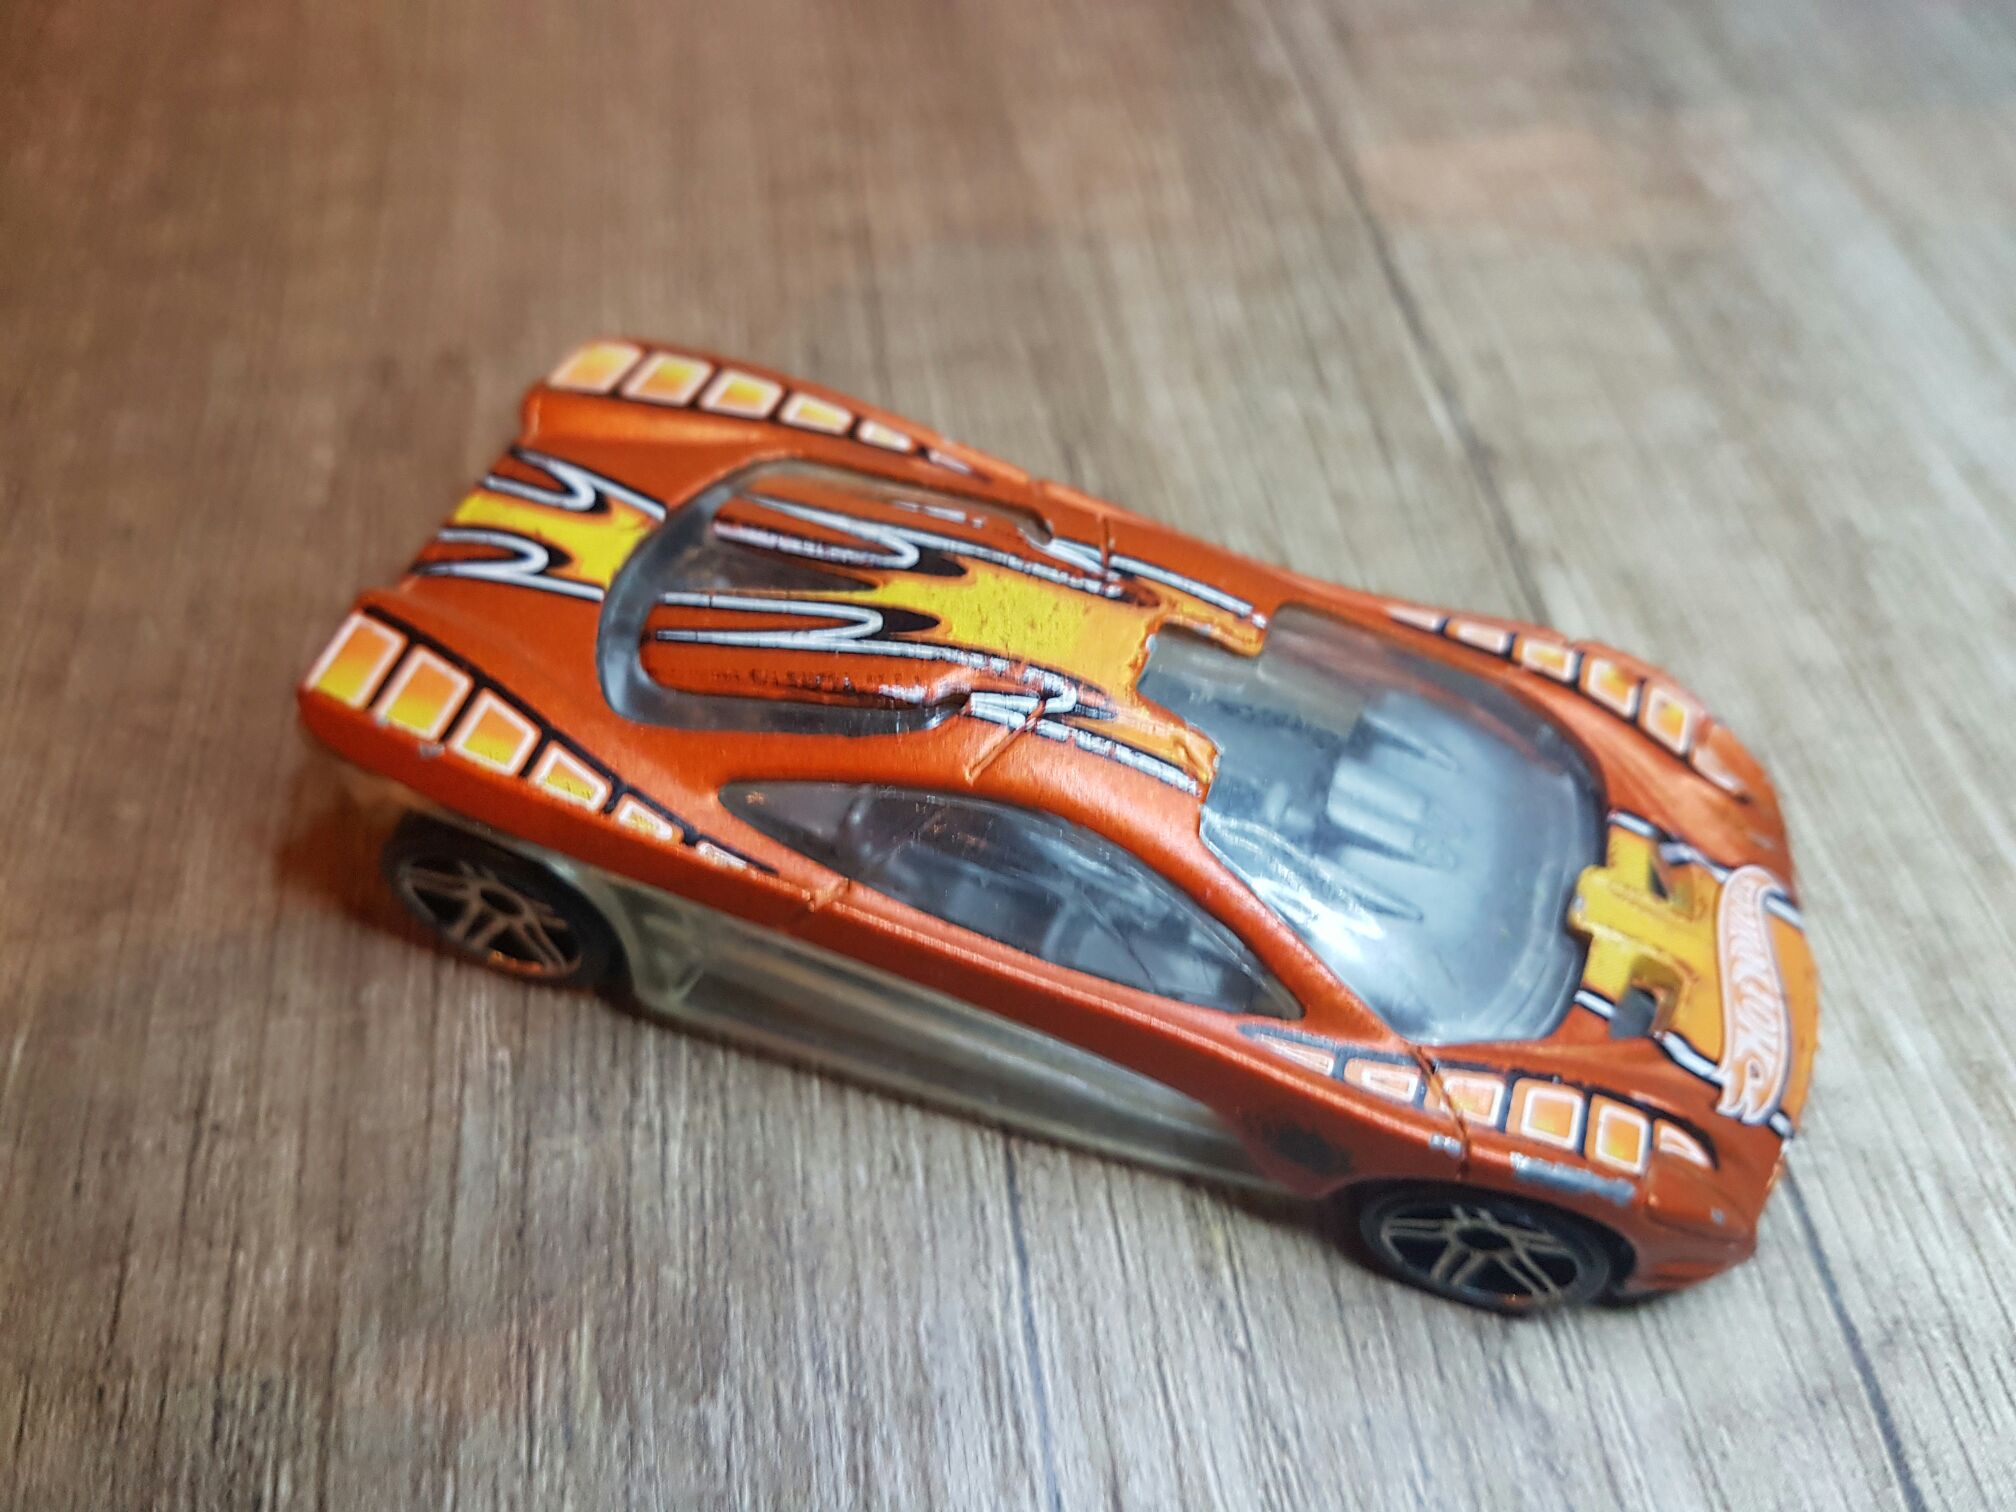 HW Prototype 12 (HW)  toy car collectible - Main Image 1